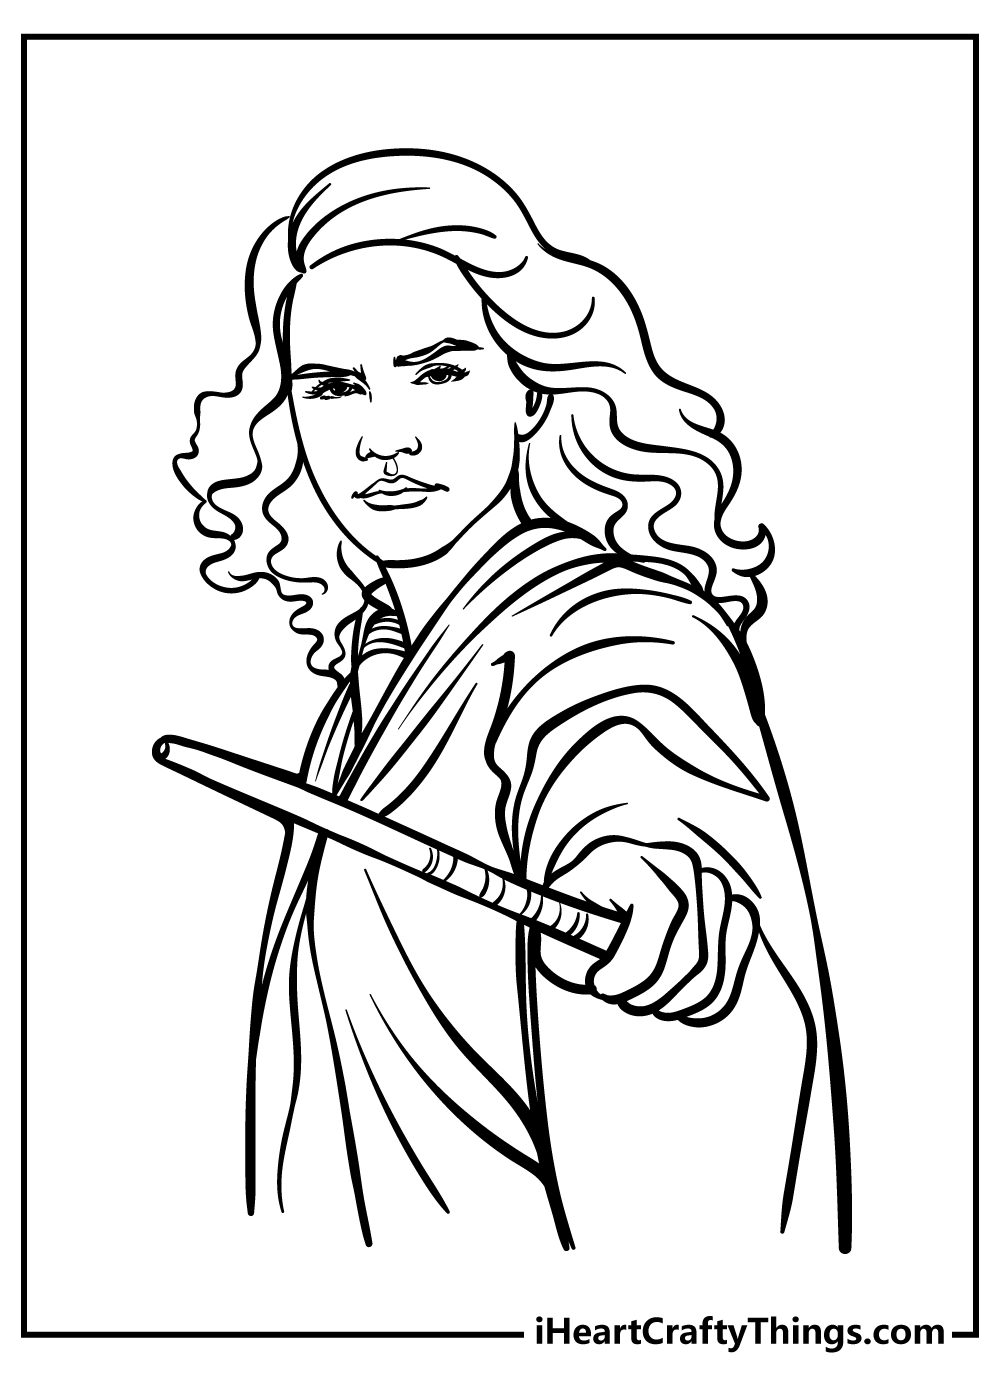 Printable Harry Potter Coloring Pages (Updated 2022)